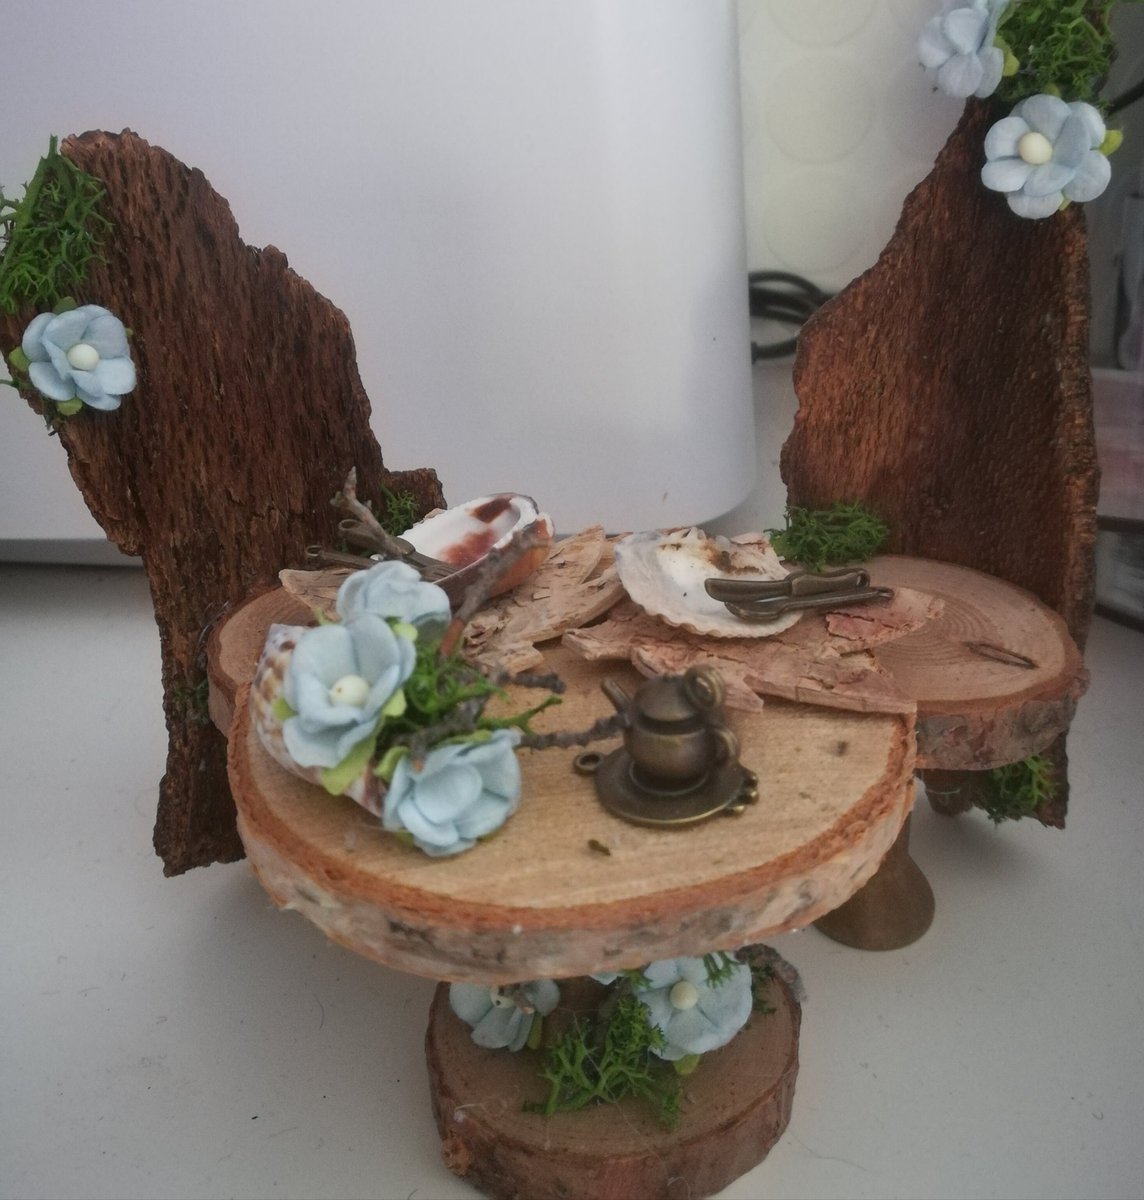 This gorgeous little table and chairs set, is perfect for afternoon tea in any Fairy Garden.
#craftbuzz #shopscotland #smallbiz #Etsy #handmade #fairy #faeries #FairyTail #fairy